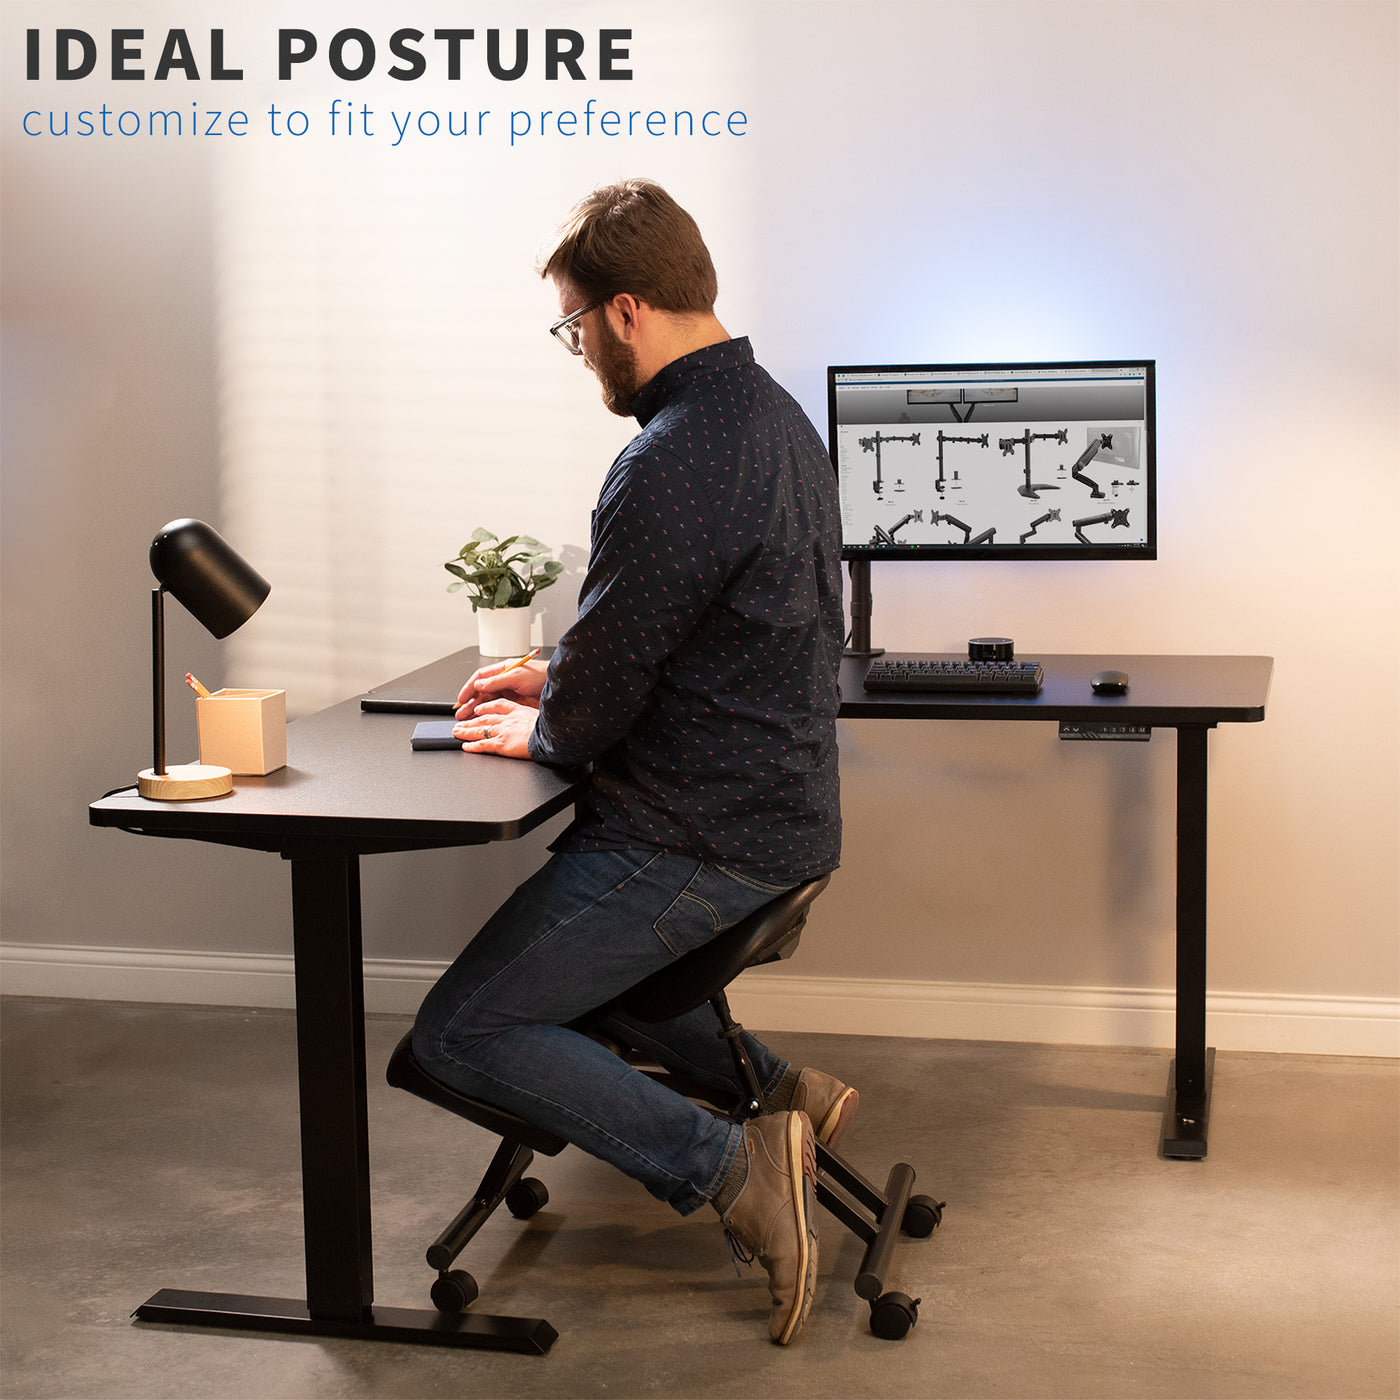 Enyware The Posture Seat: Turn an ordinary chair into a healthy chair.